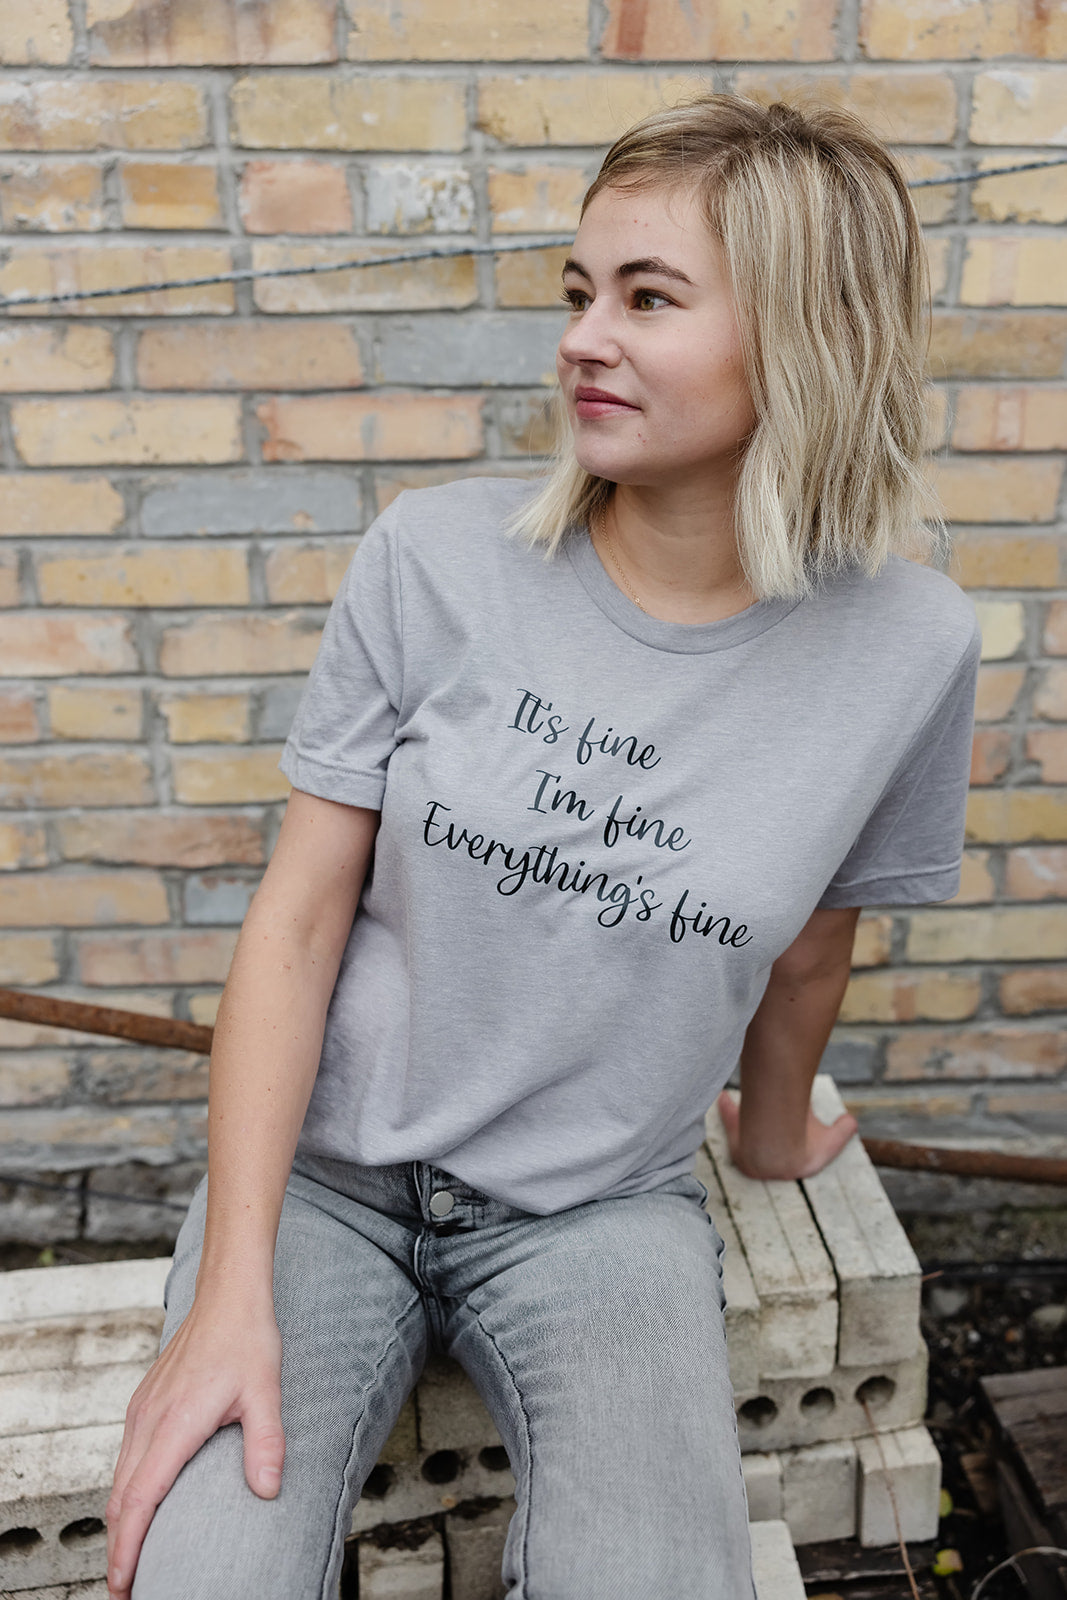 IT'S FINE   I'M FINE   EVERYTHING'S FINE   grey shirt- Unisex size adult graphic tees